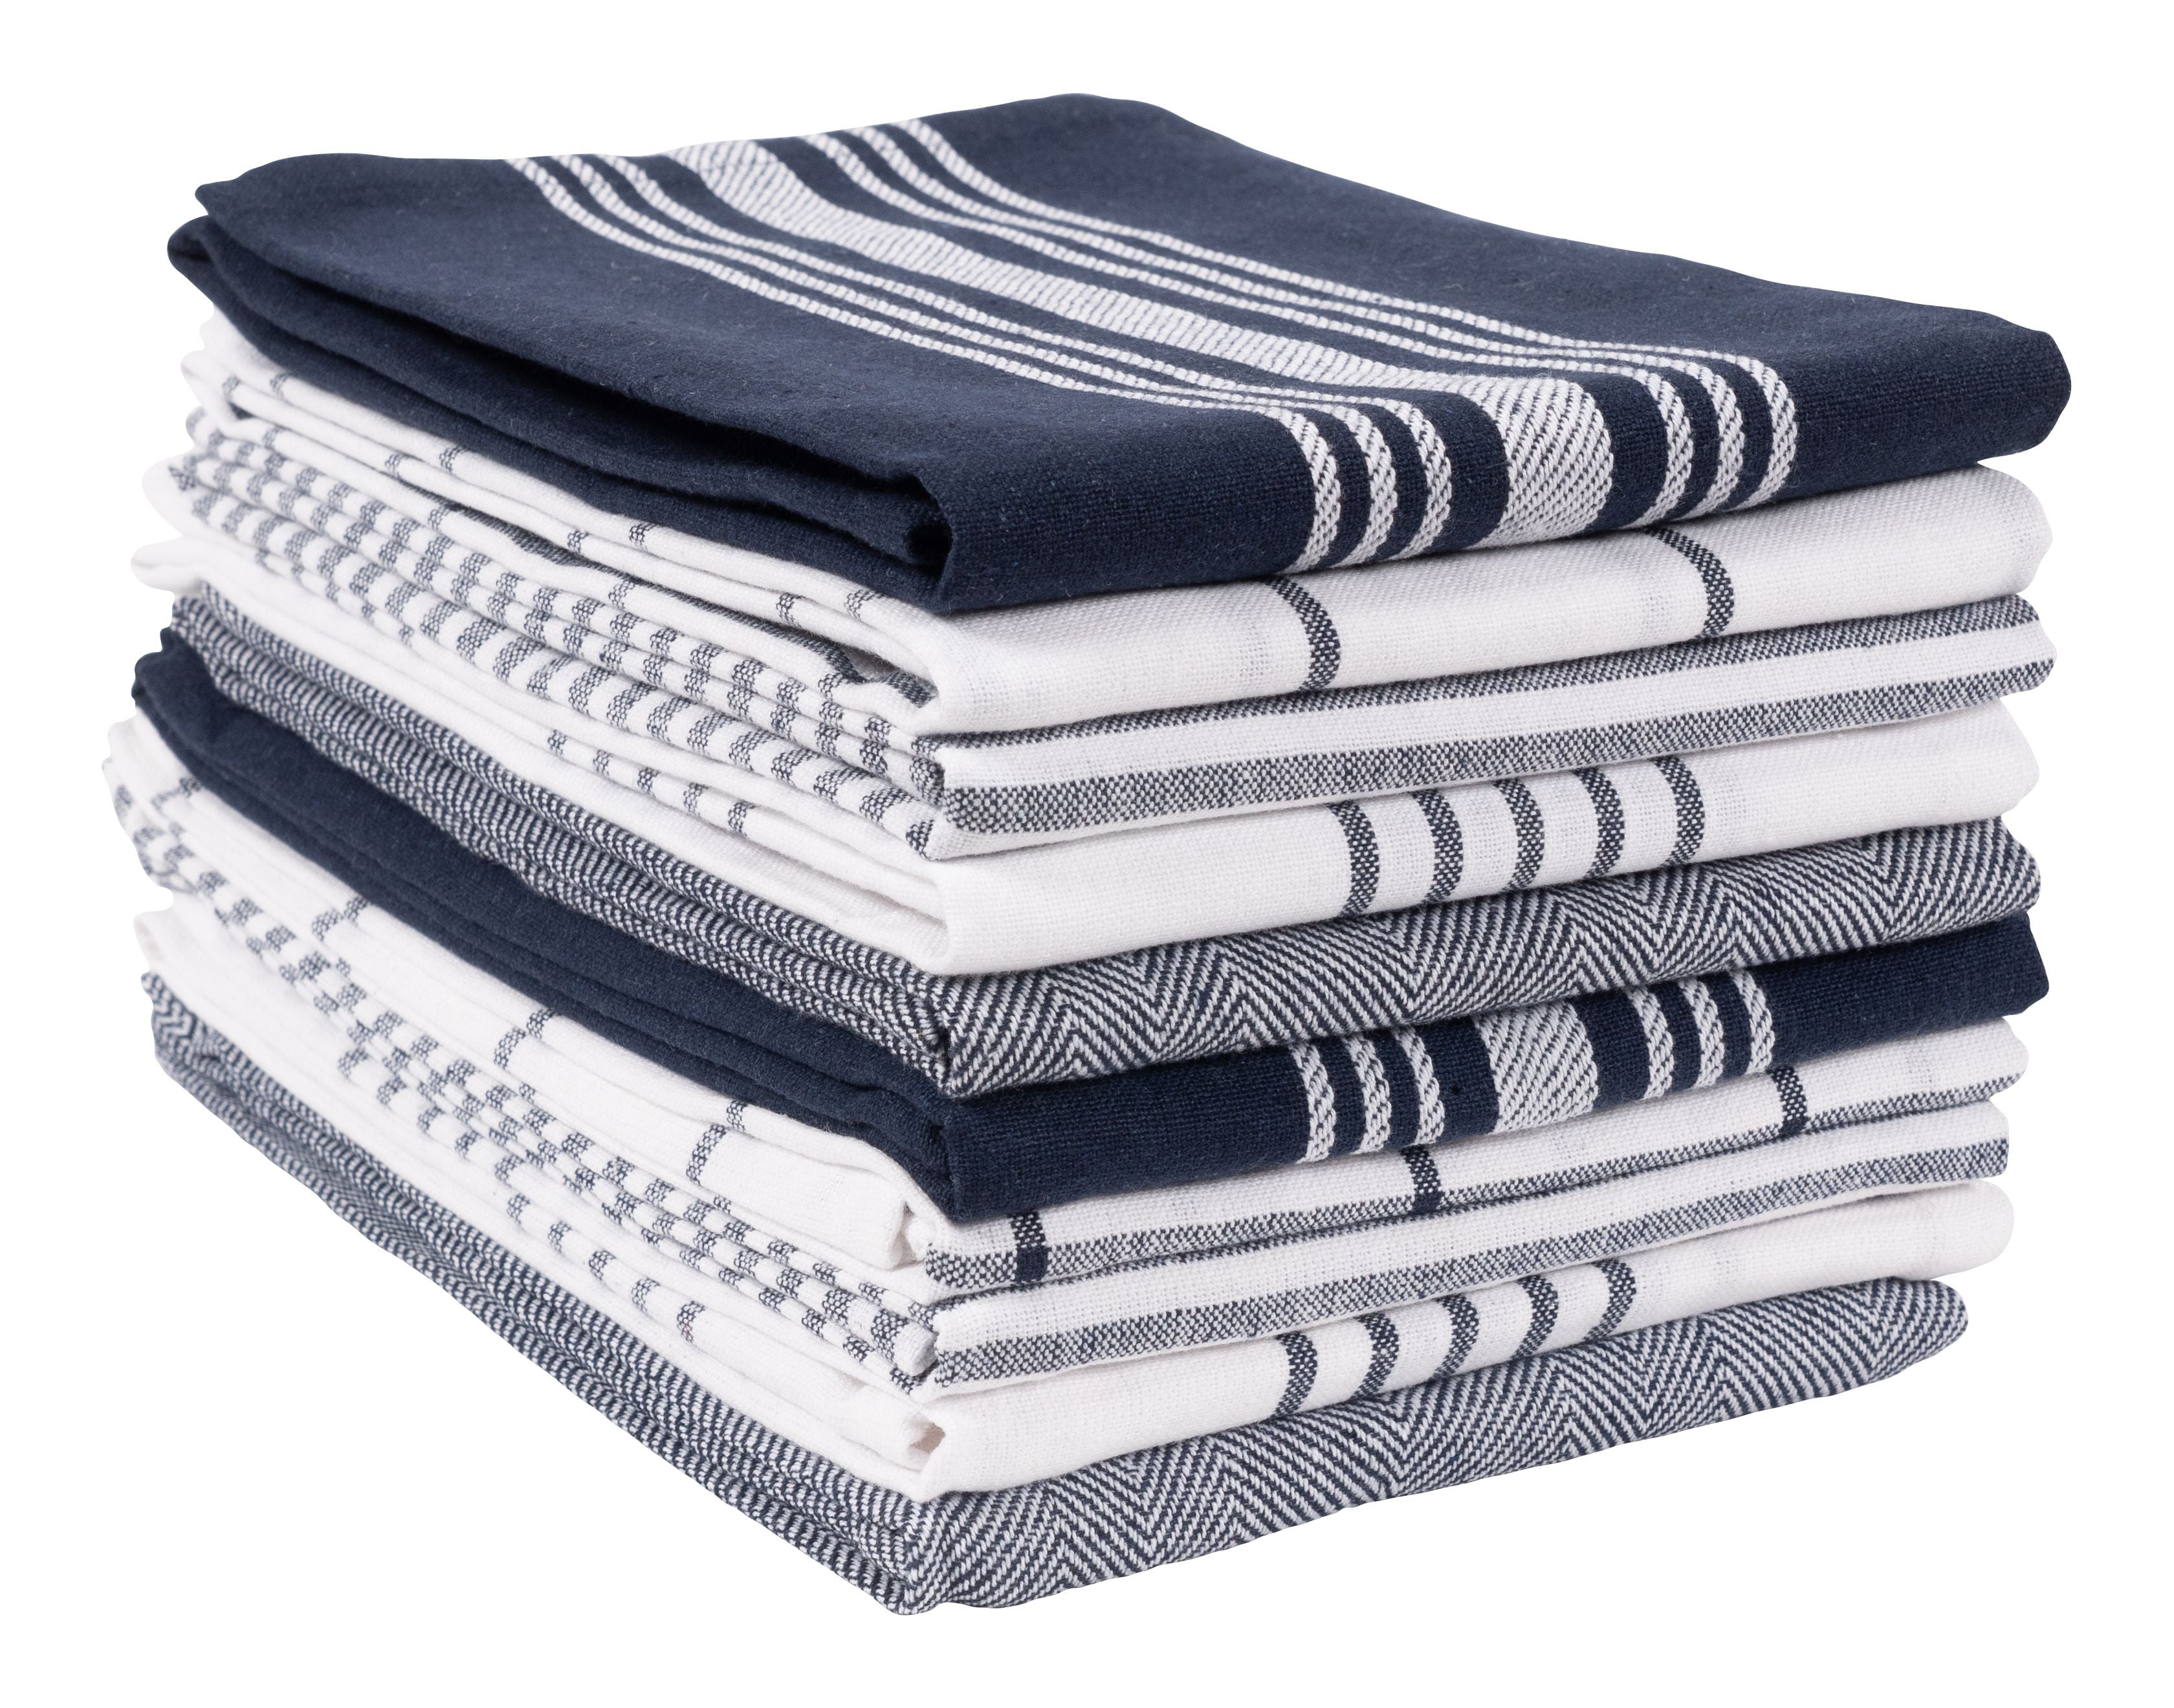 Set of 6 Navy 18x28 Professional Grade Cotton Tea Towels for Everyday Cooking and Baking- Modern Clean Striped Pattern Heavy Duty Oversized Kitchen Towels & Dishcloth Highly Absorbent 